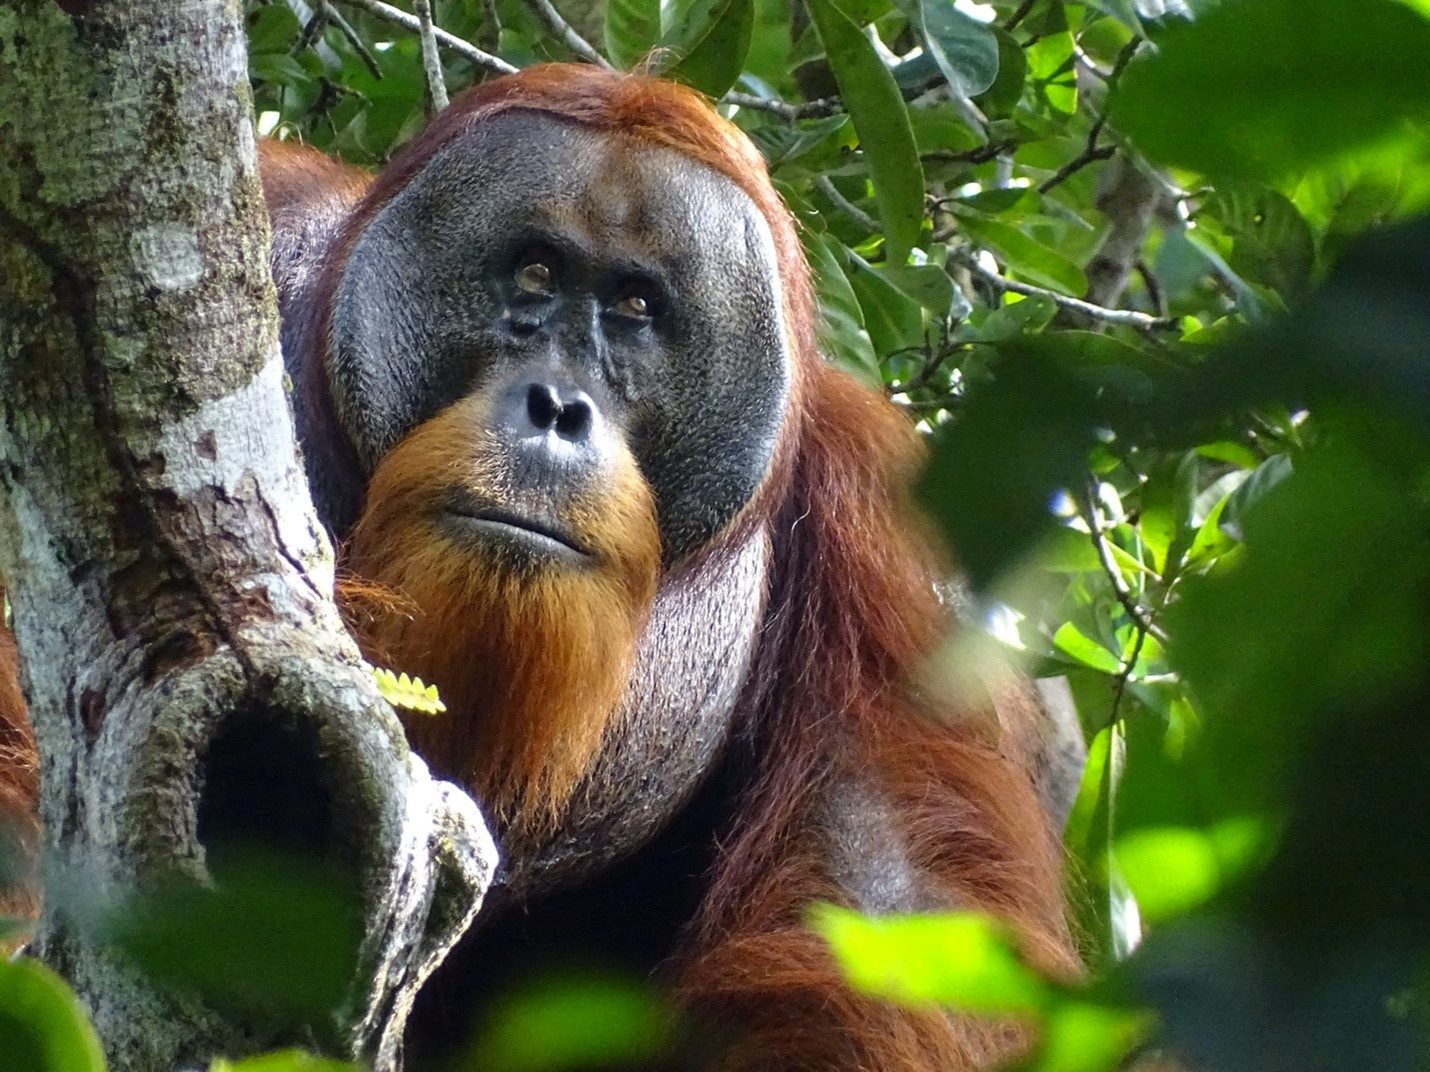 Orangutan’s use of medicinal plant to treat wound intrigues scientists